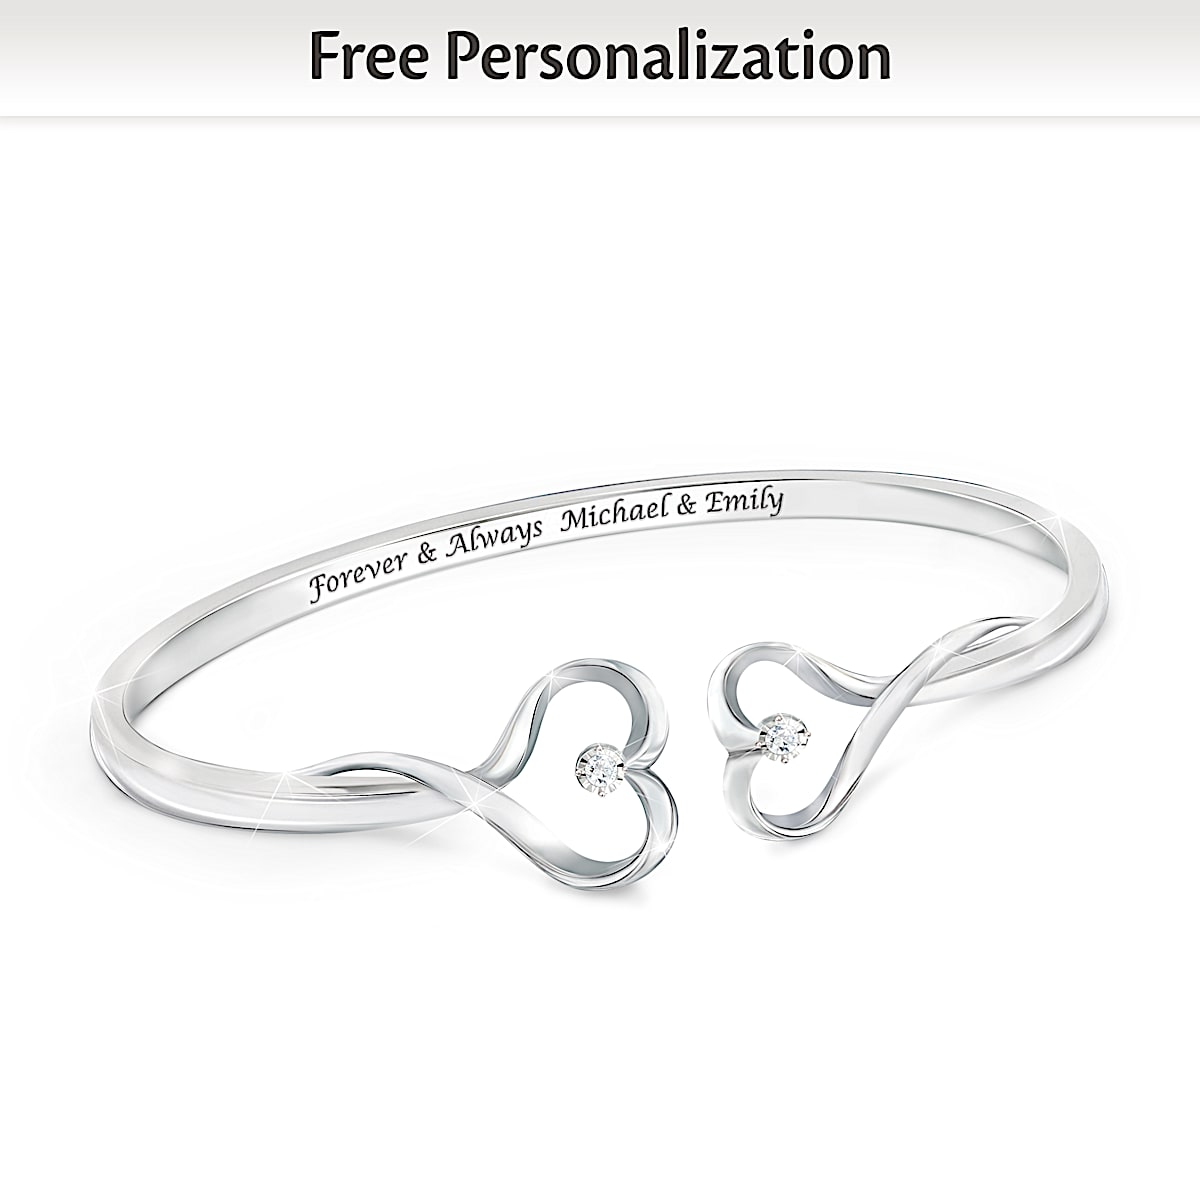 Sterling Silver Personalized Engraved Round Bangle Bracelet for Child | eBay